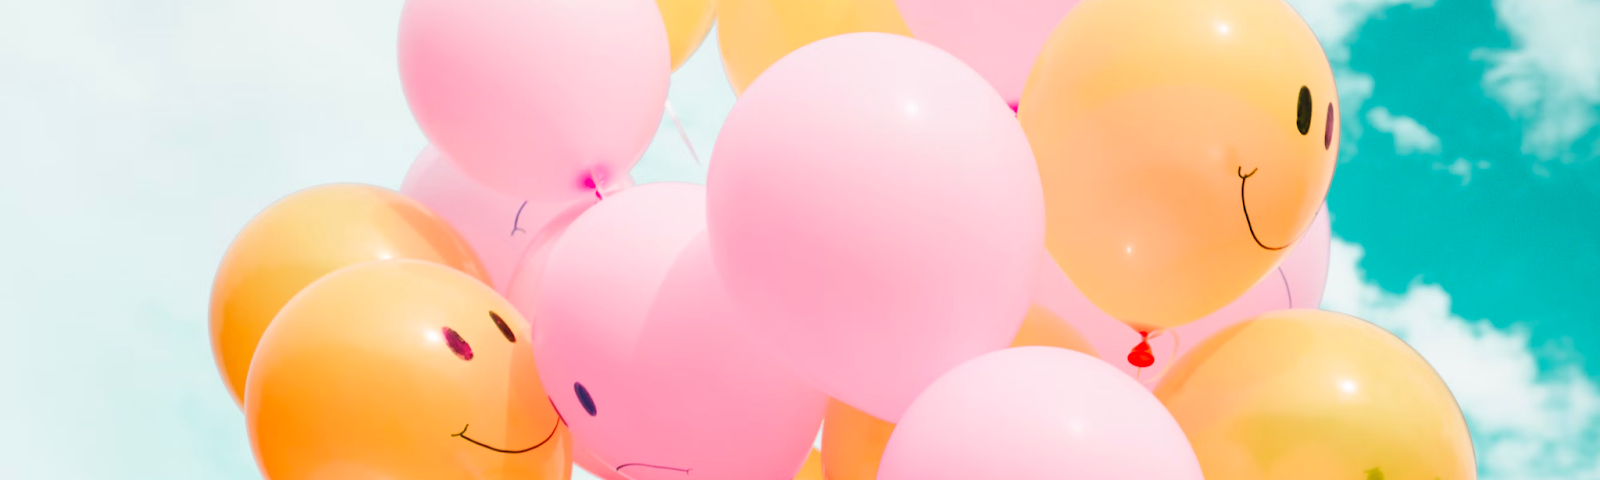 Shown is a group of pink and yellow balloons. The pink balloons have a sad face on them and the yellow balloons have a happy face.